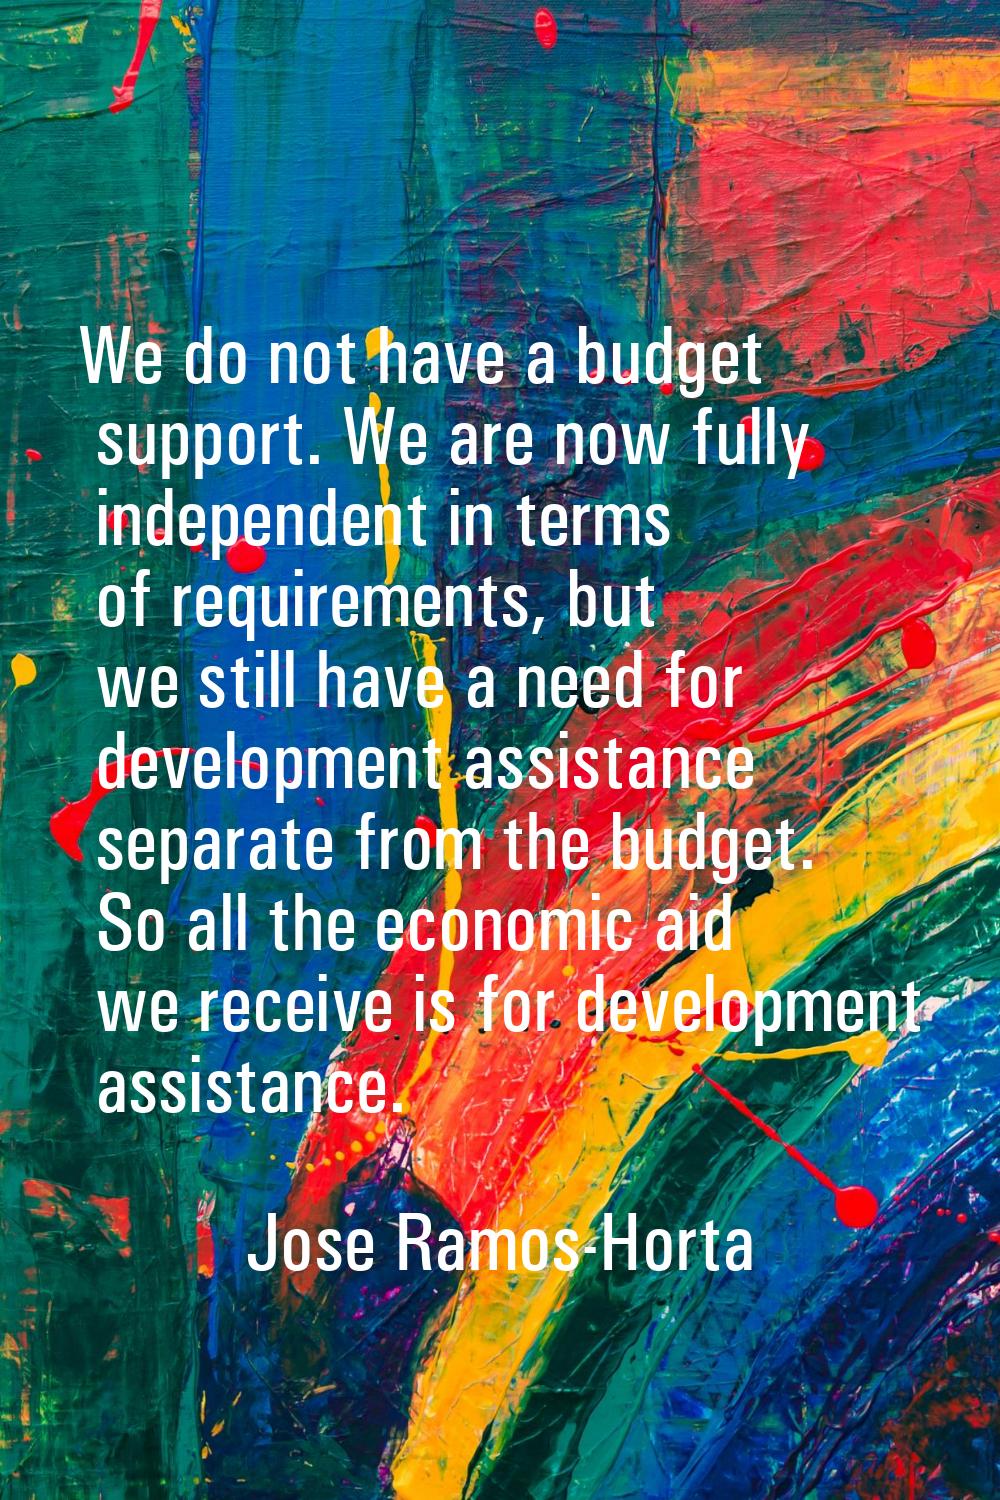 We do not have a budget support. We are now fully independent in terms of requirements, but we stil